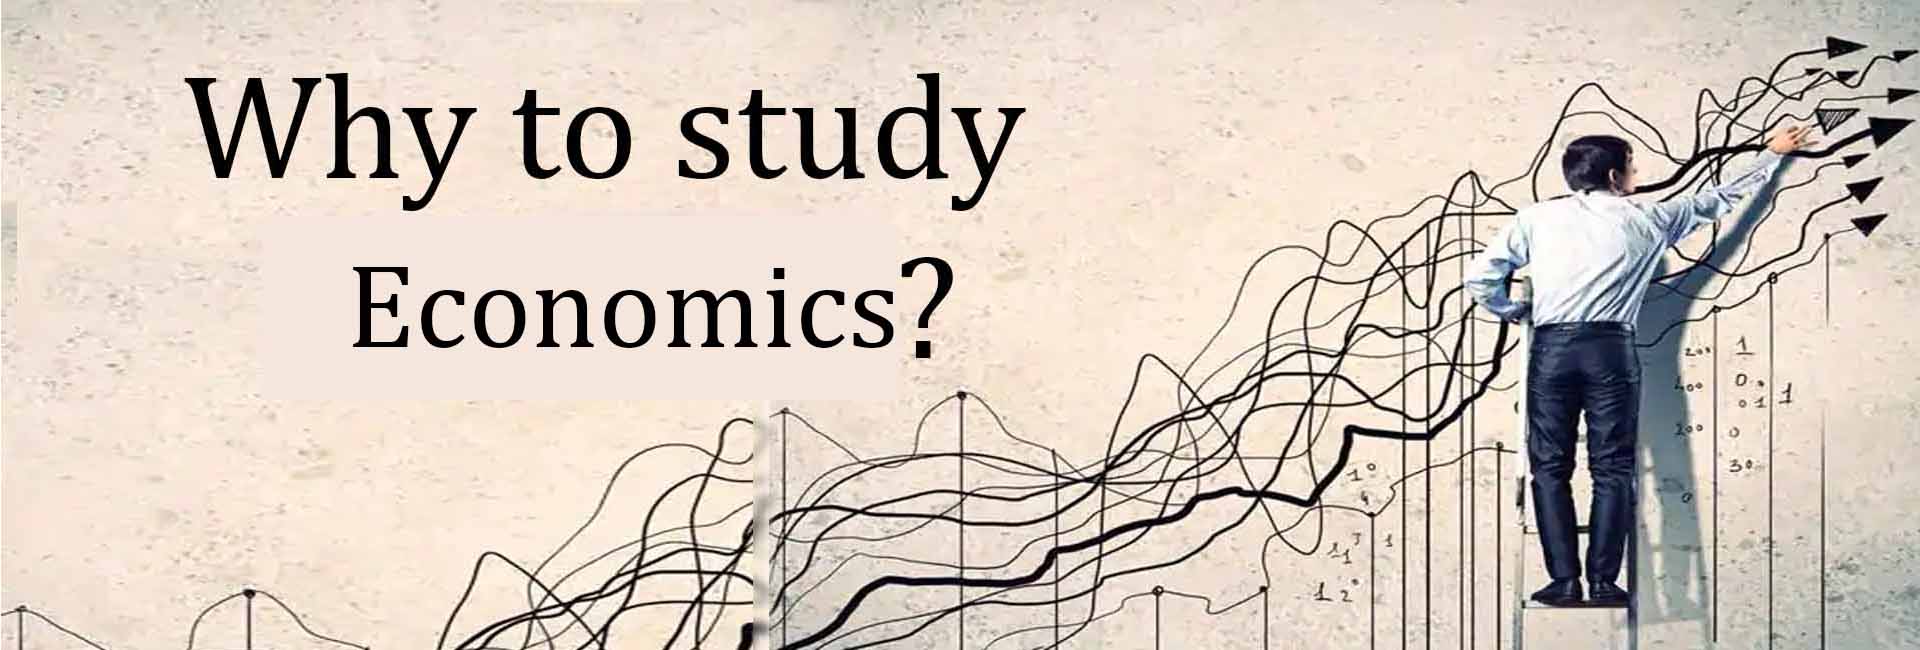 research on economics and education